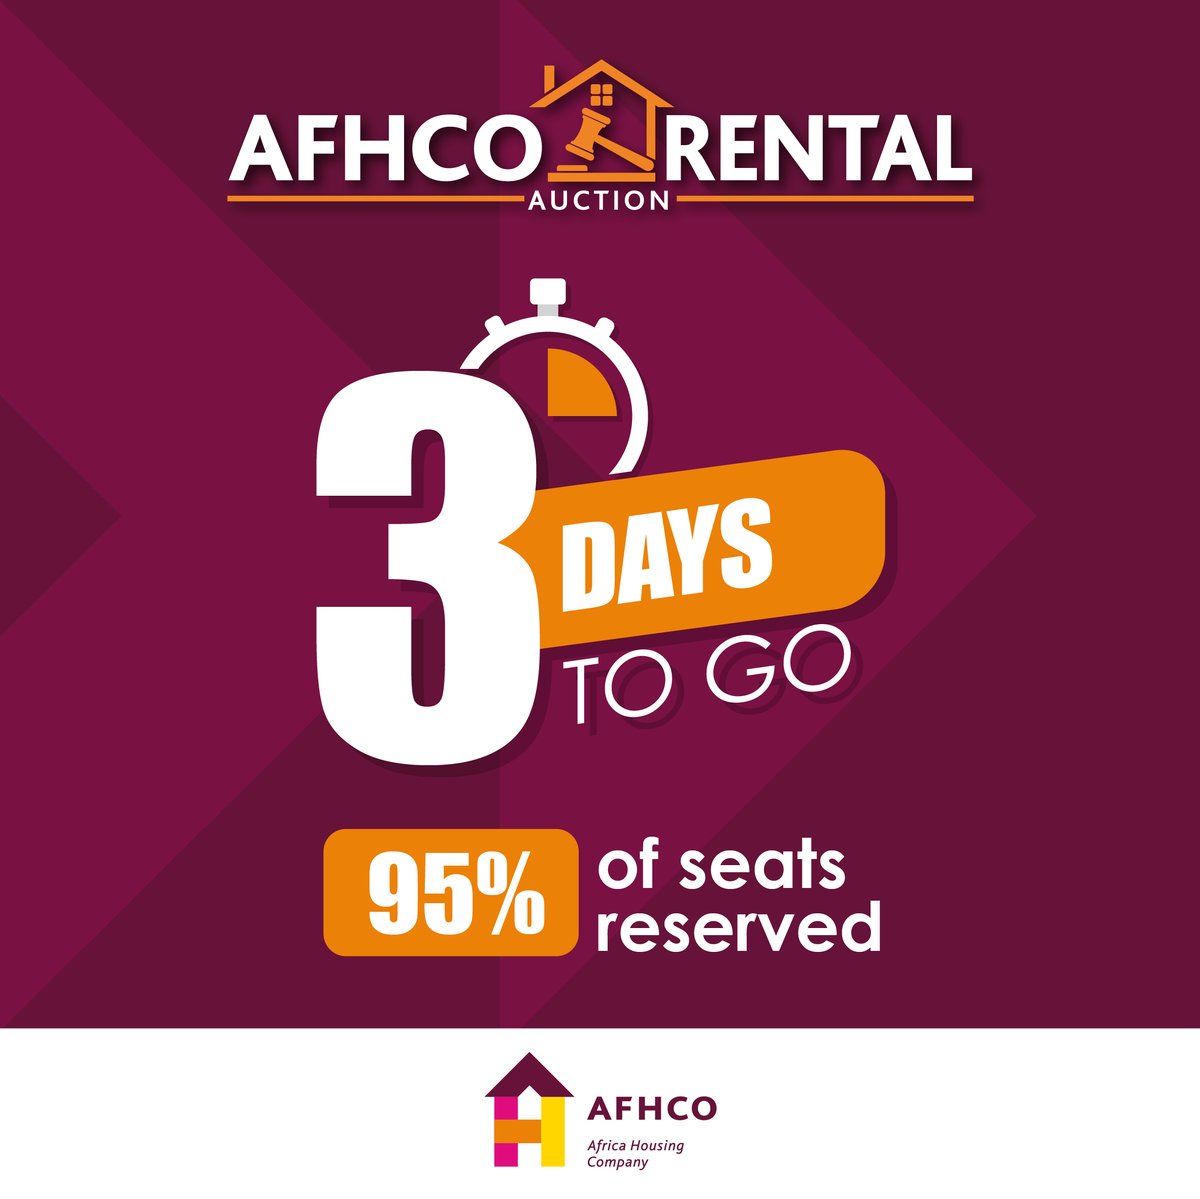 Hurry! Limited space is available! Reserve your seat now: bit.ly/49TGaNN #Rental #AFHCORentalAuction #innercityrentals #cityliving #MoveUp #StaywithAFHCO #apartmentstolet #MoveUpwithAFHCO #AFHCO #propertymanagement #rent #apartments #johannesburg #gauteng #property